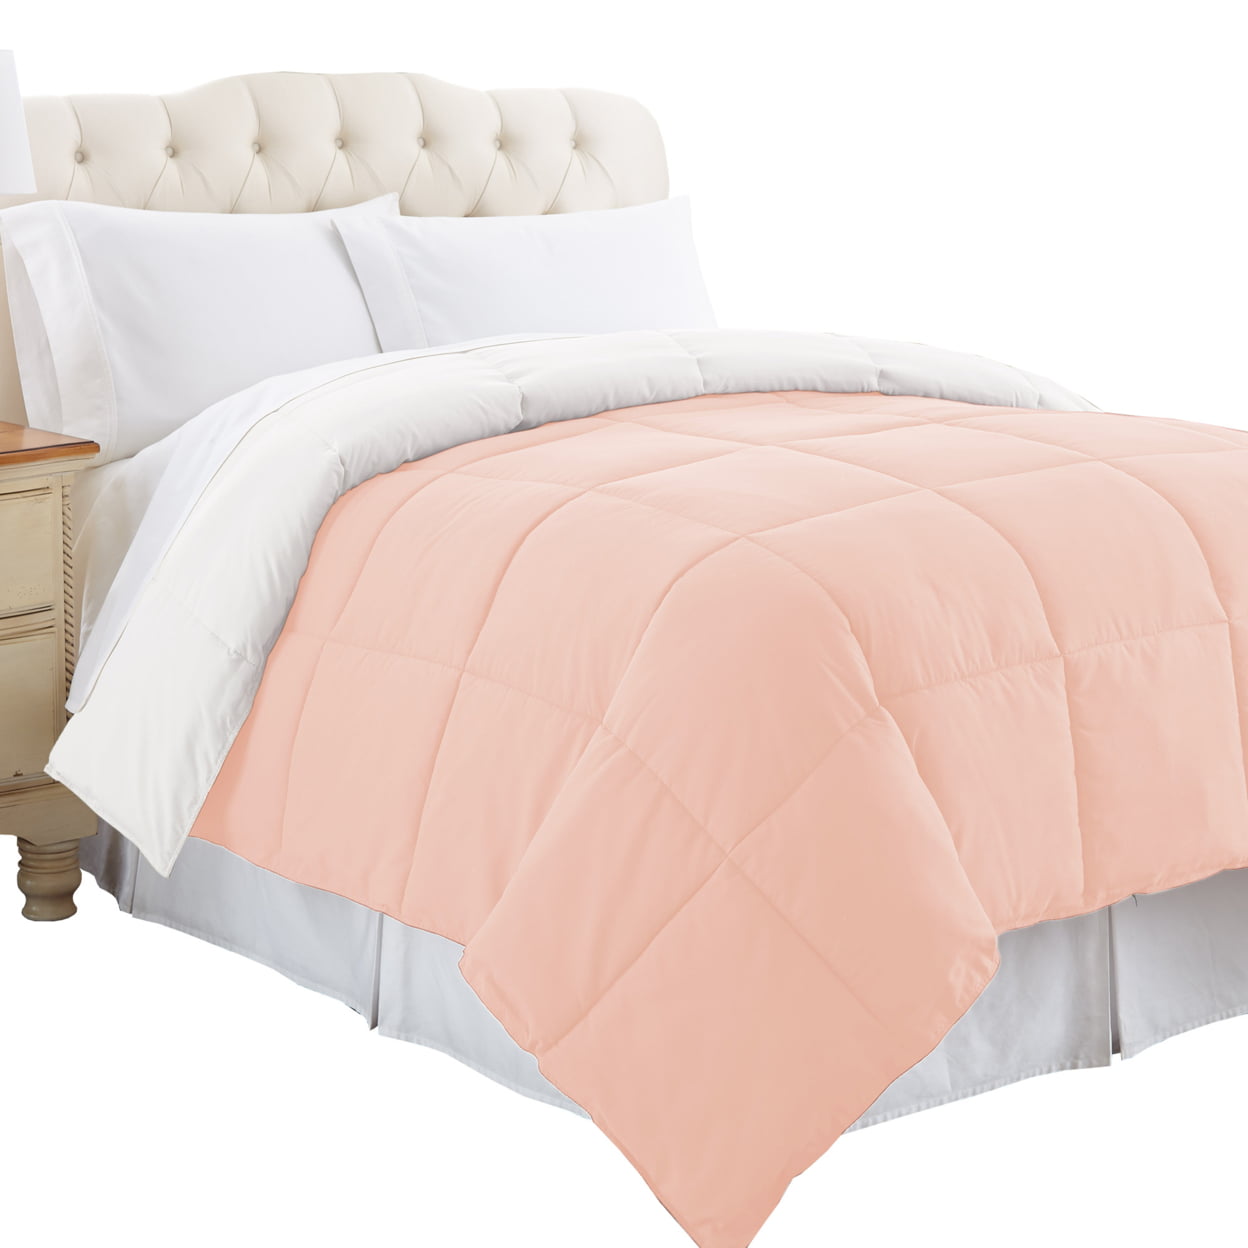 Bm202040 Genoa Twin Size Box Quilted Reversible Comforter, White & Pink